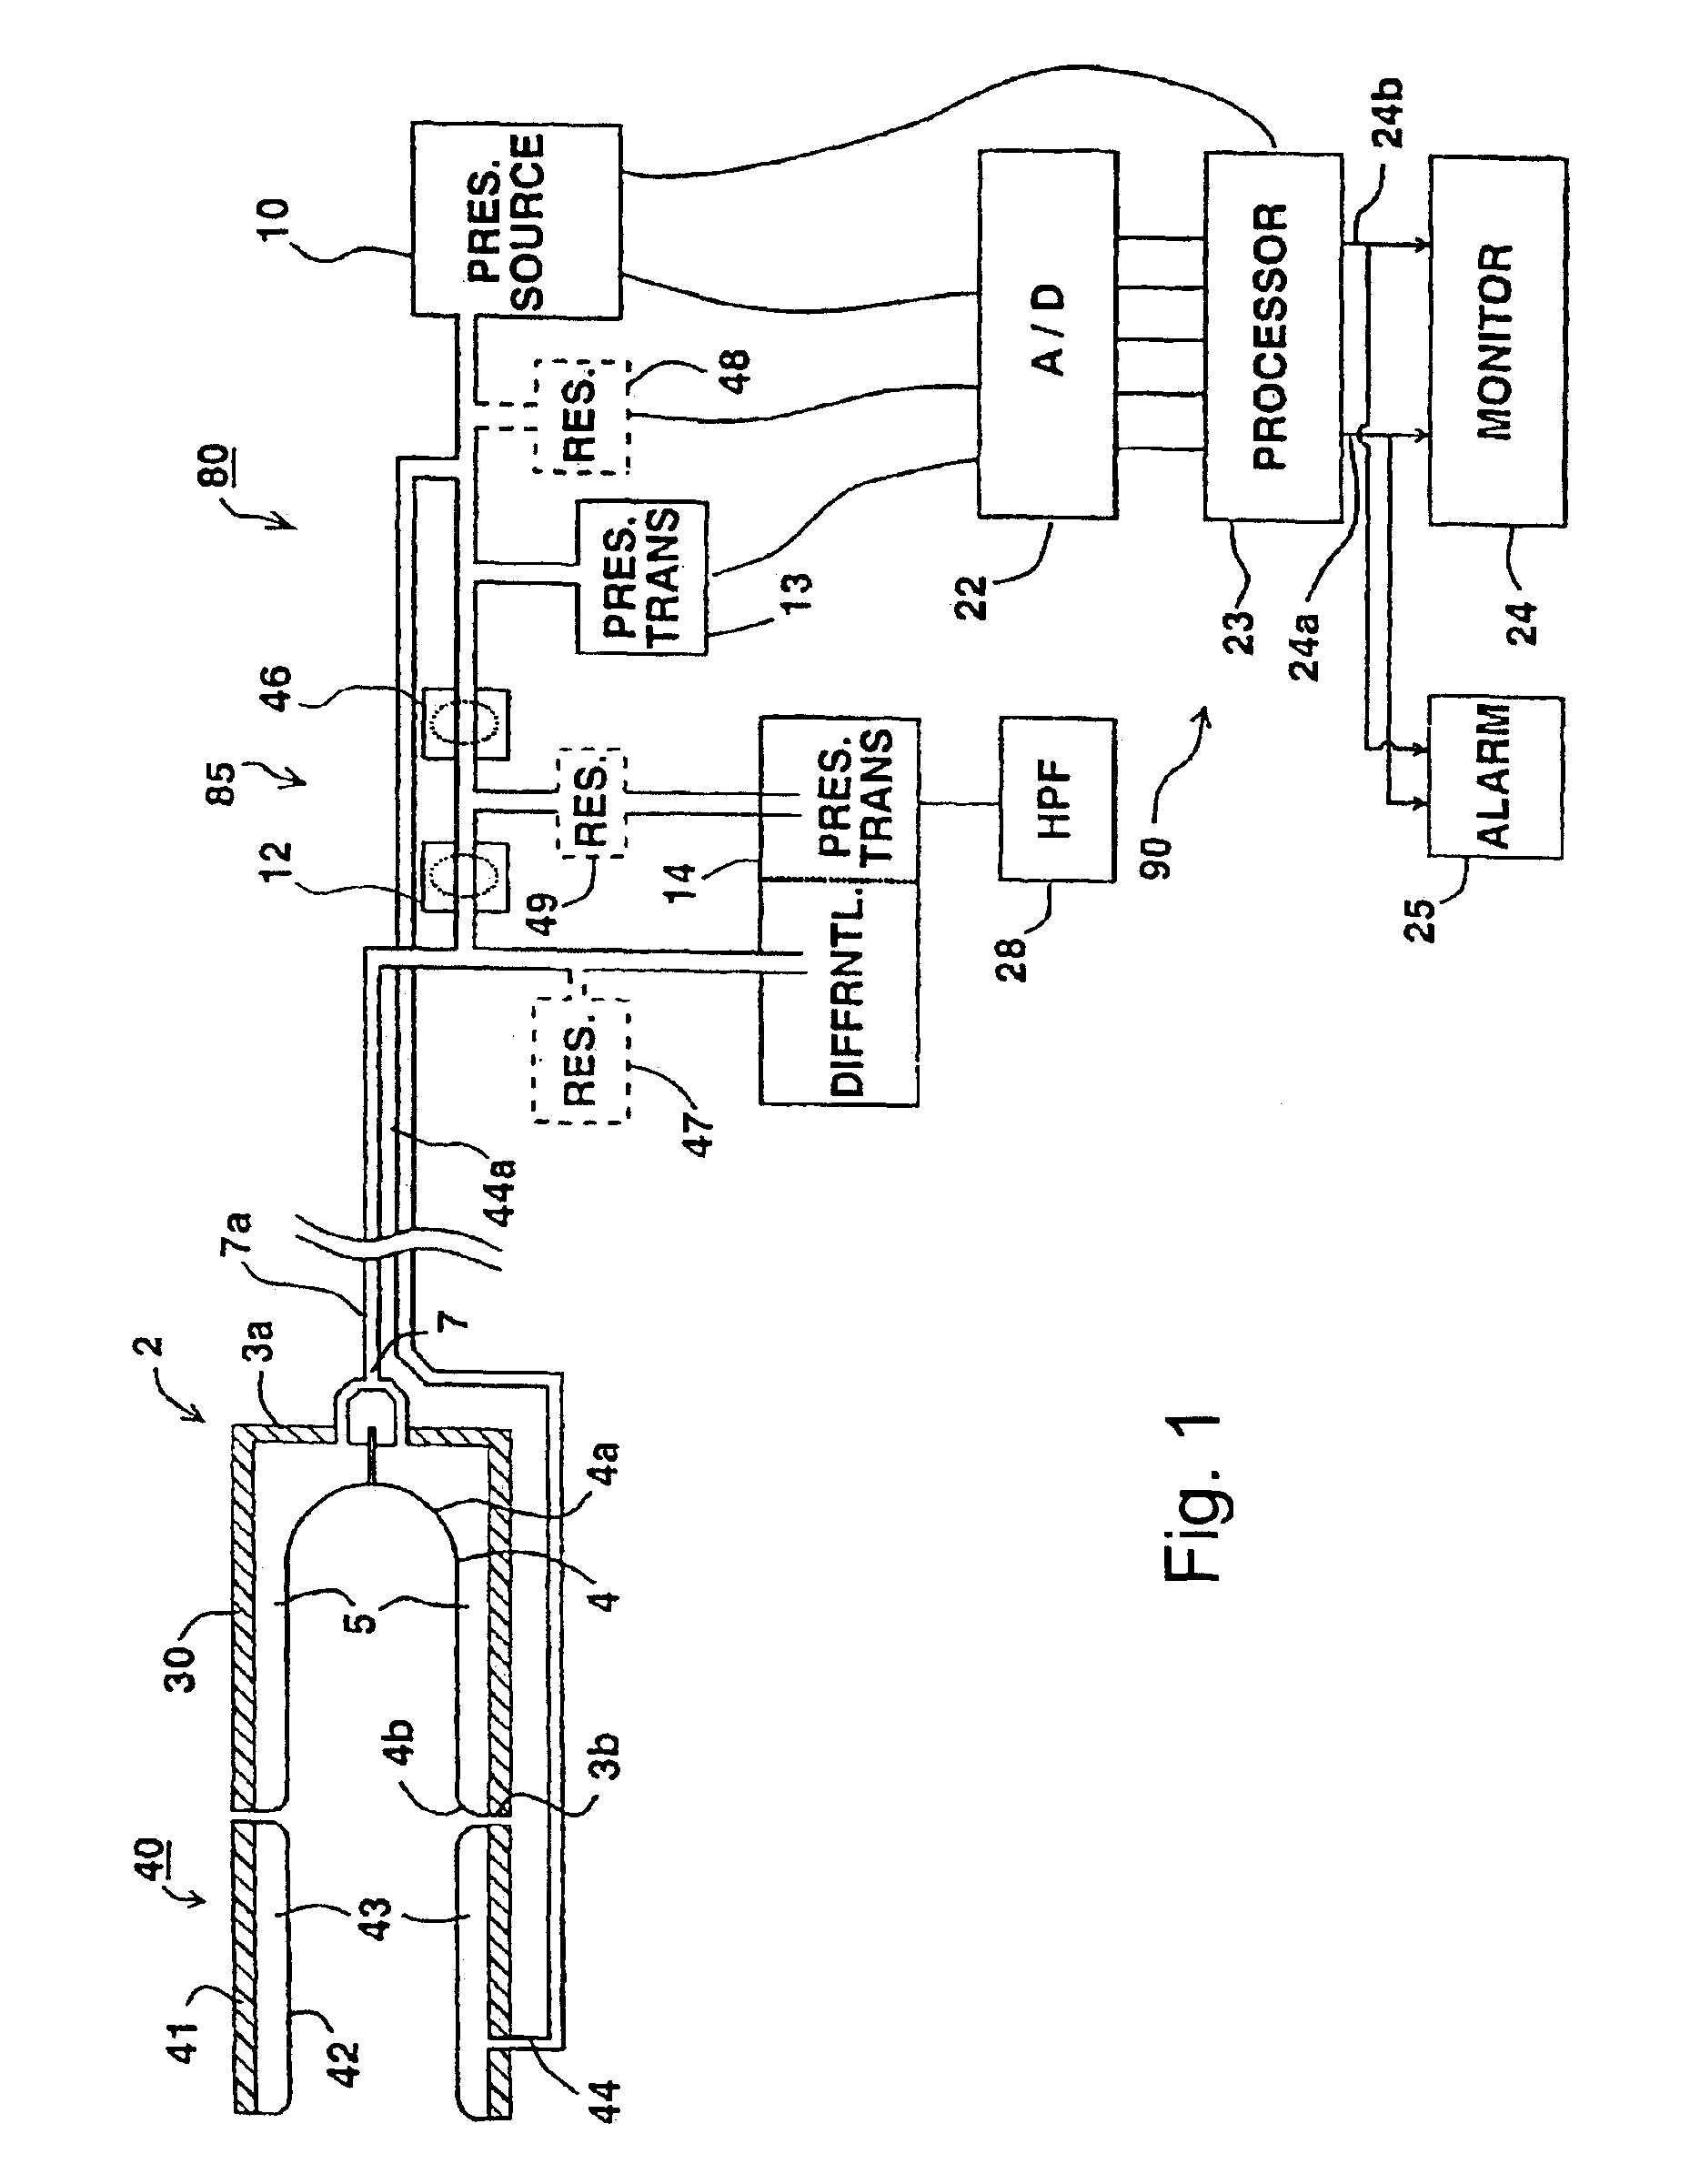 Method and apparatus for non-invasively evaluating endothelial activity in a patient